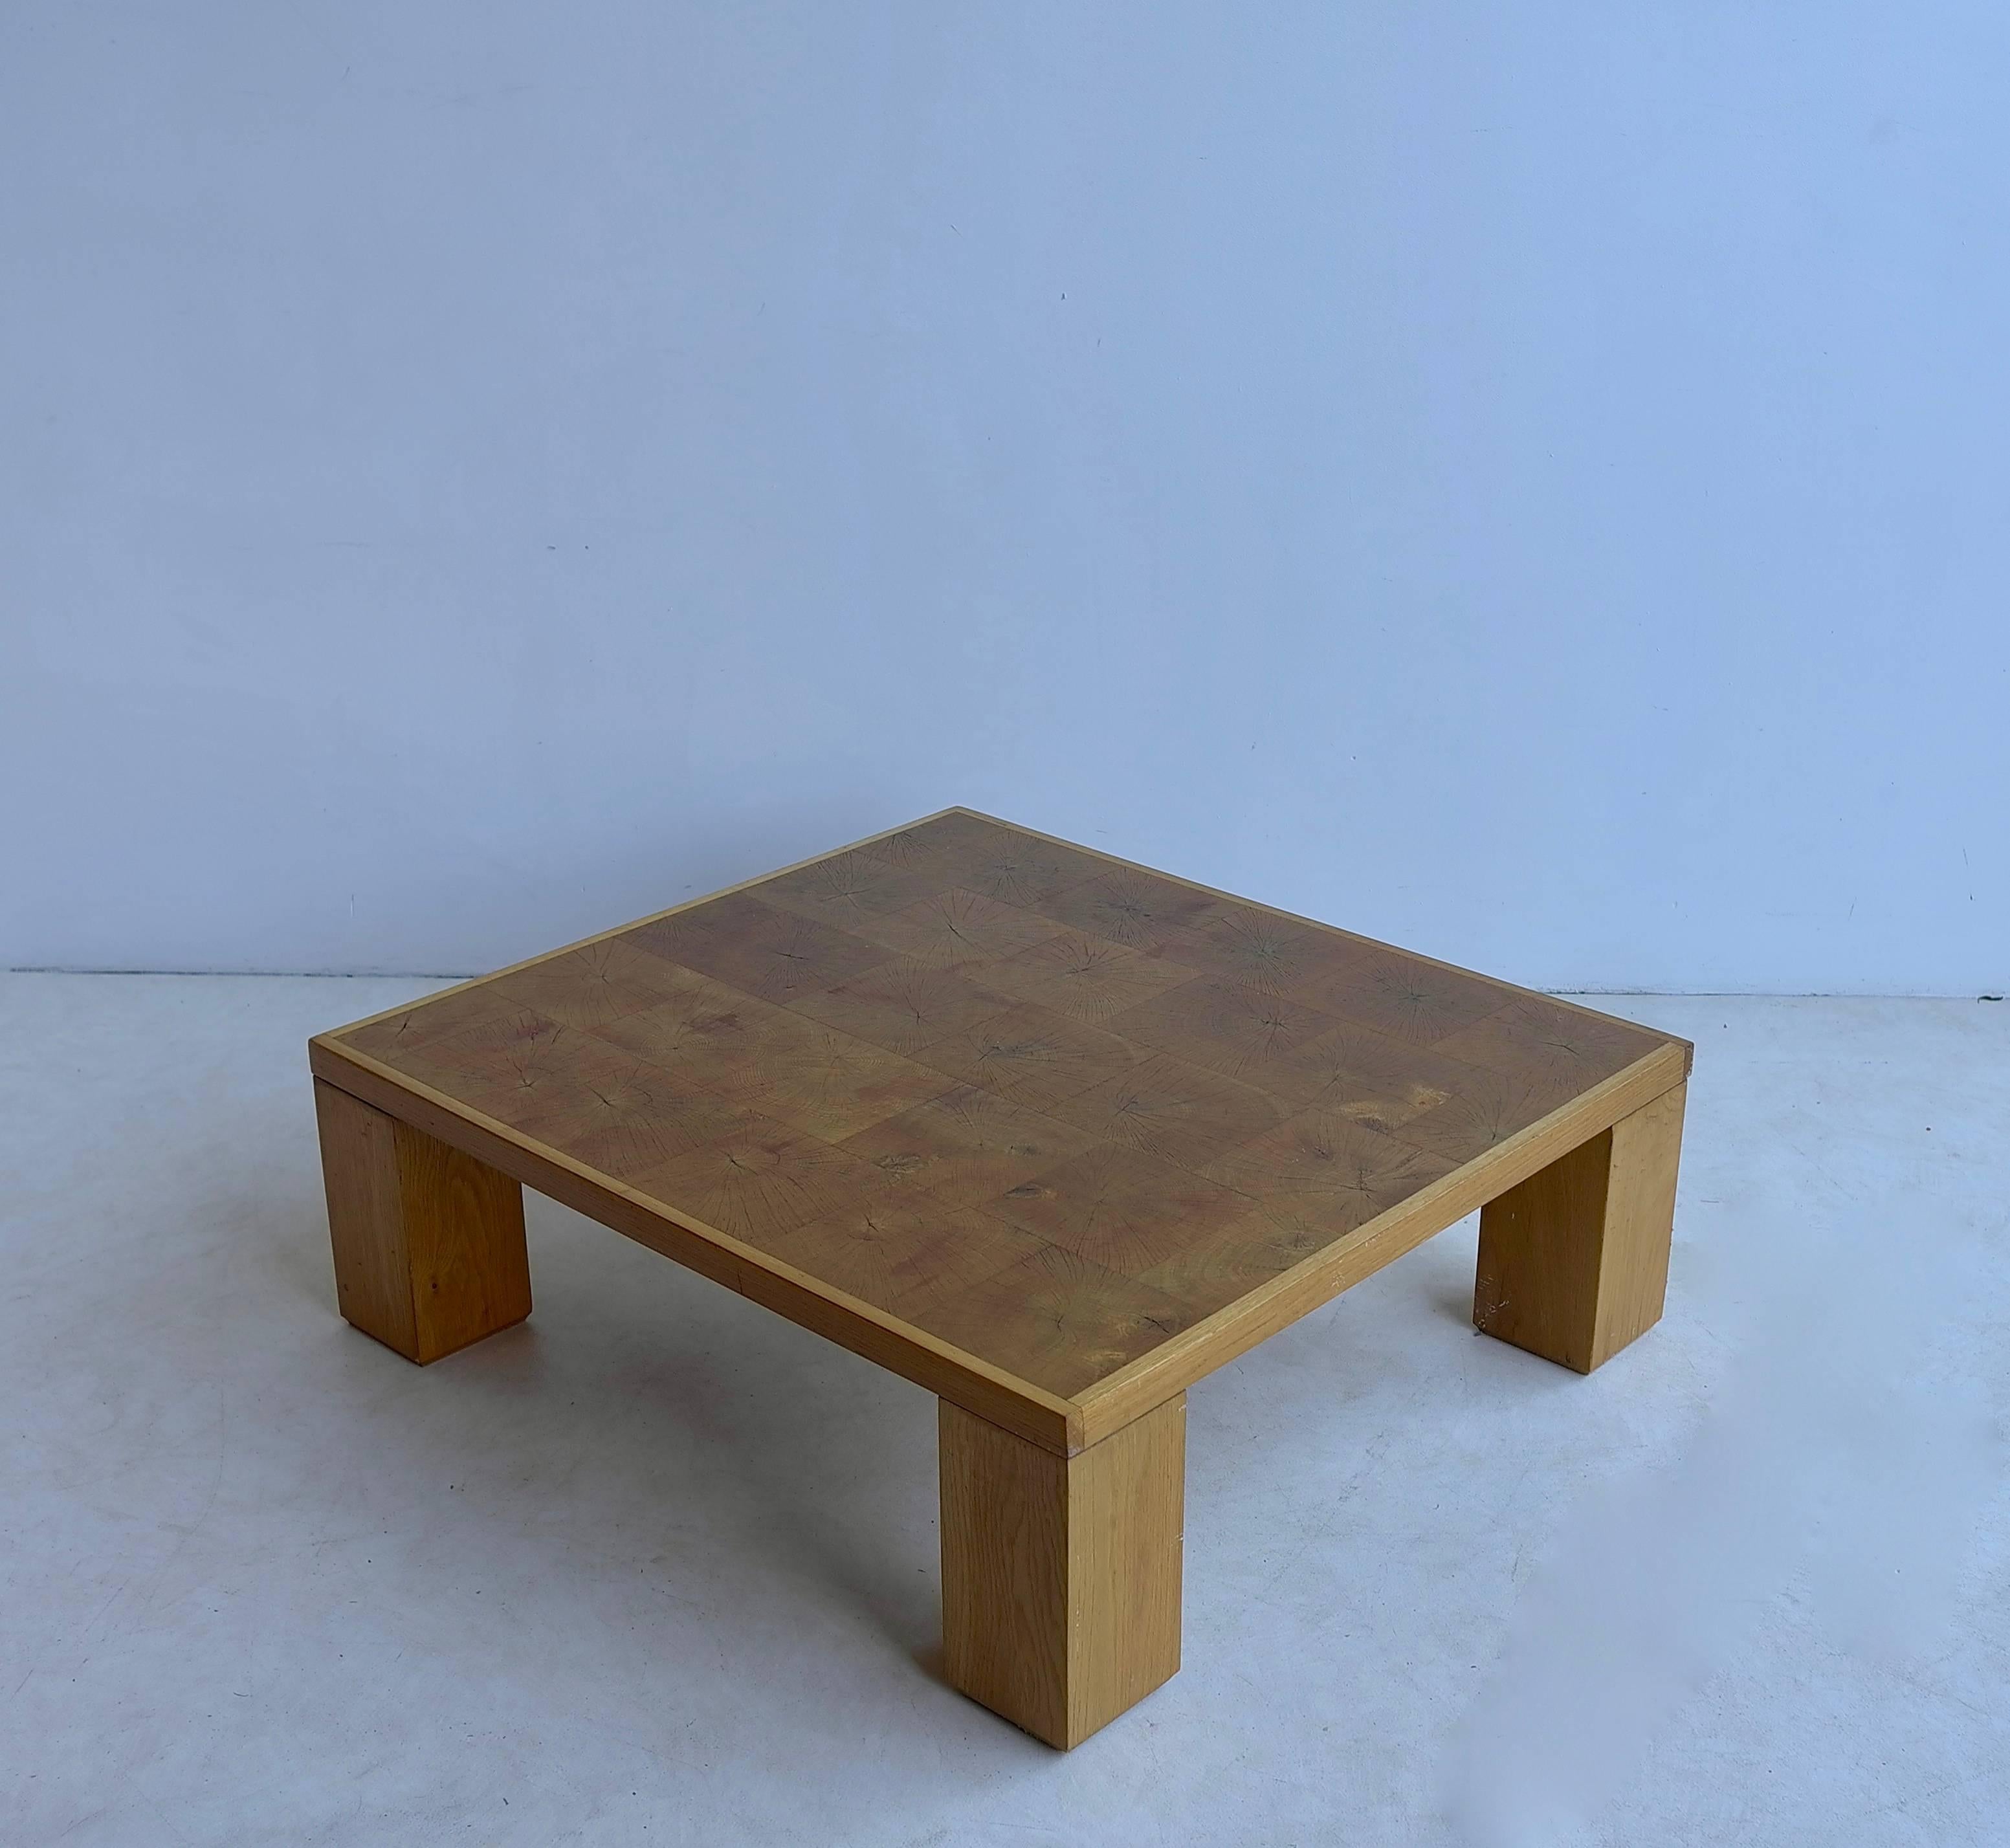 Live Edge wooden coffee table, Europe, 1970s.